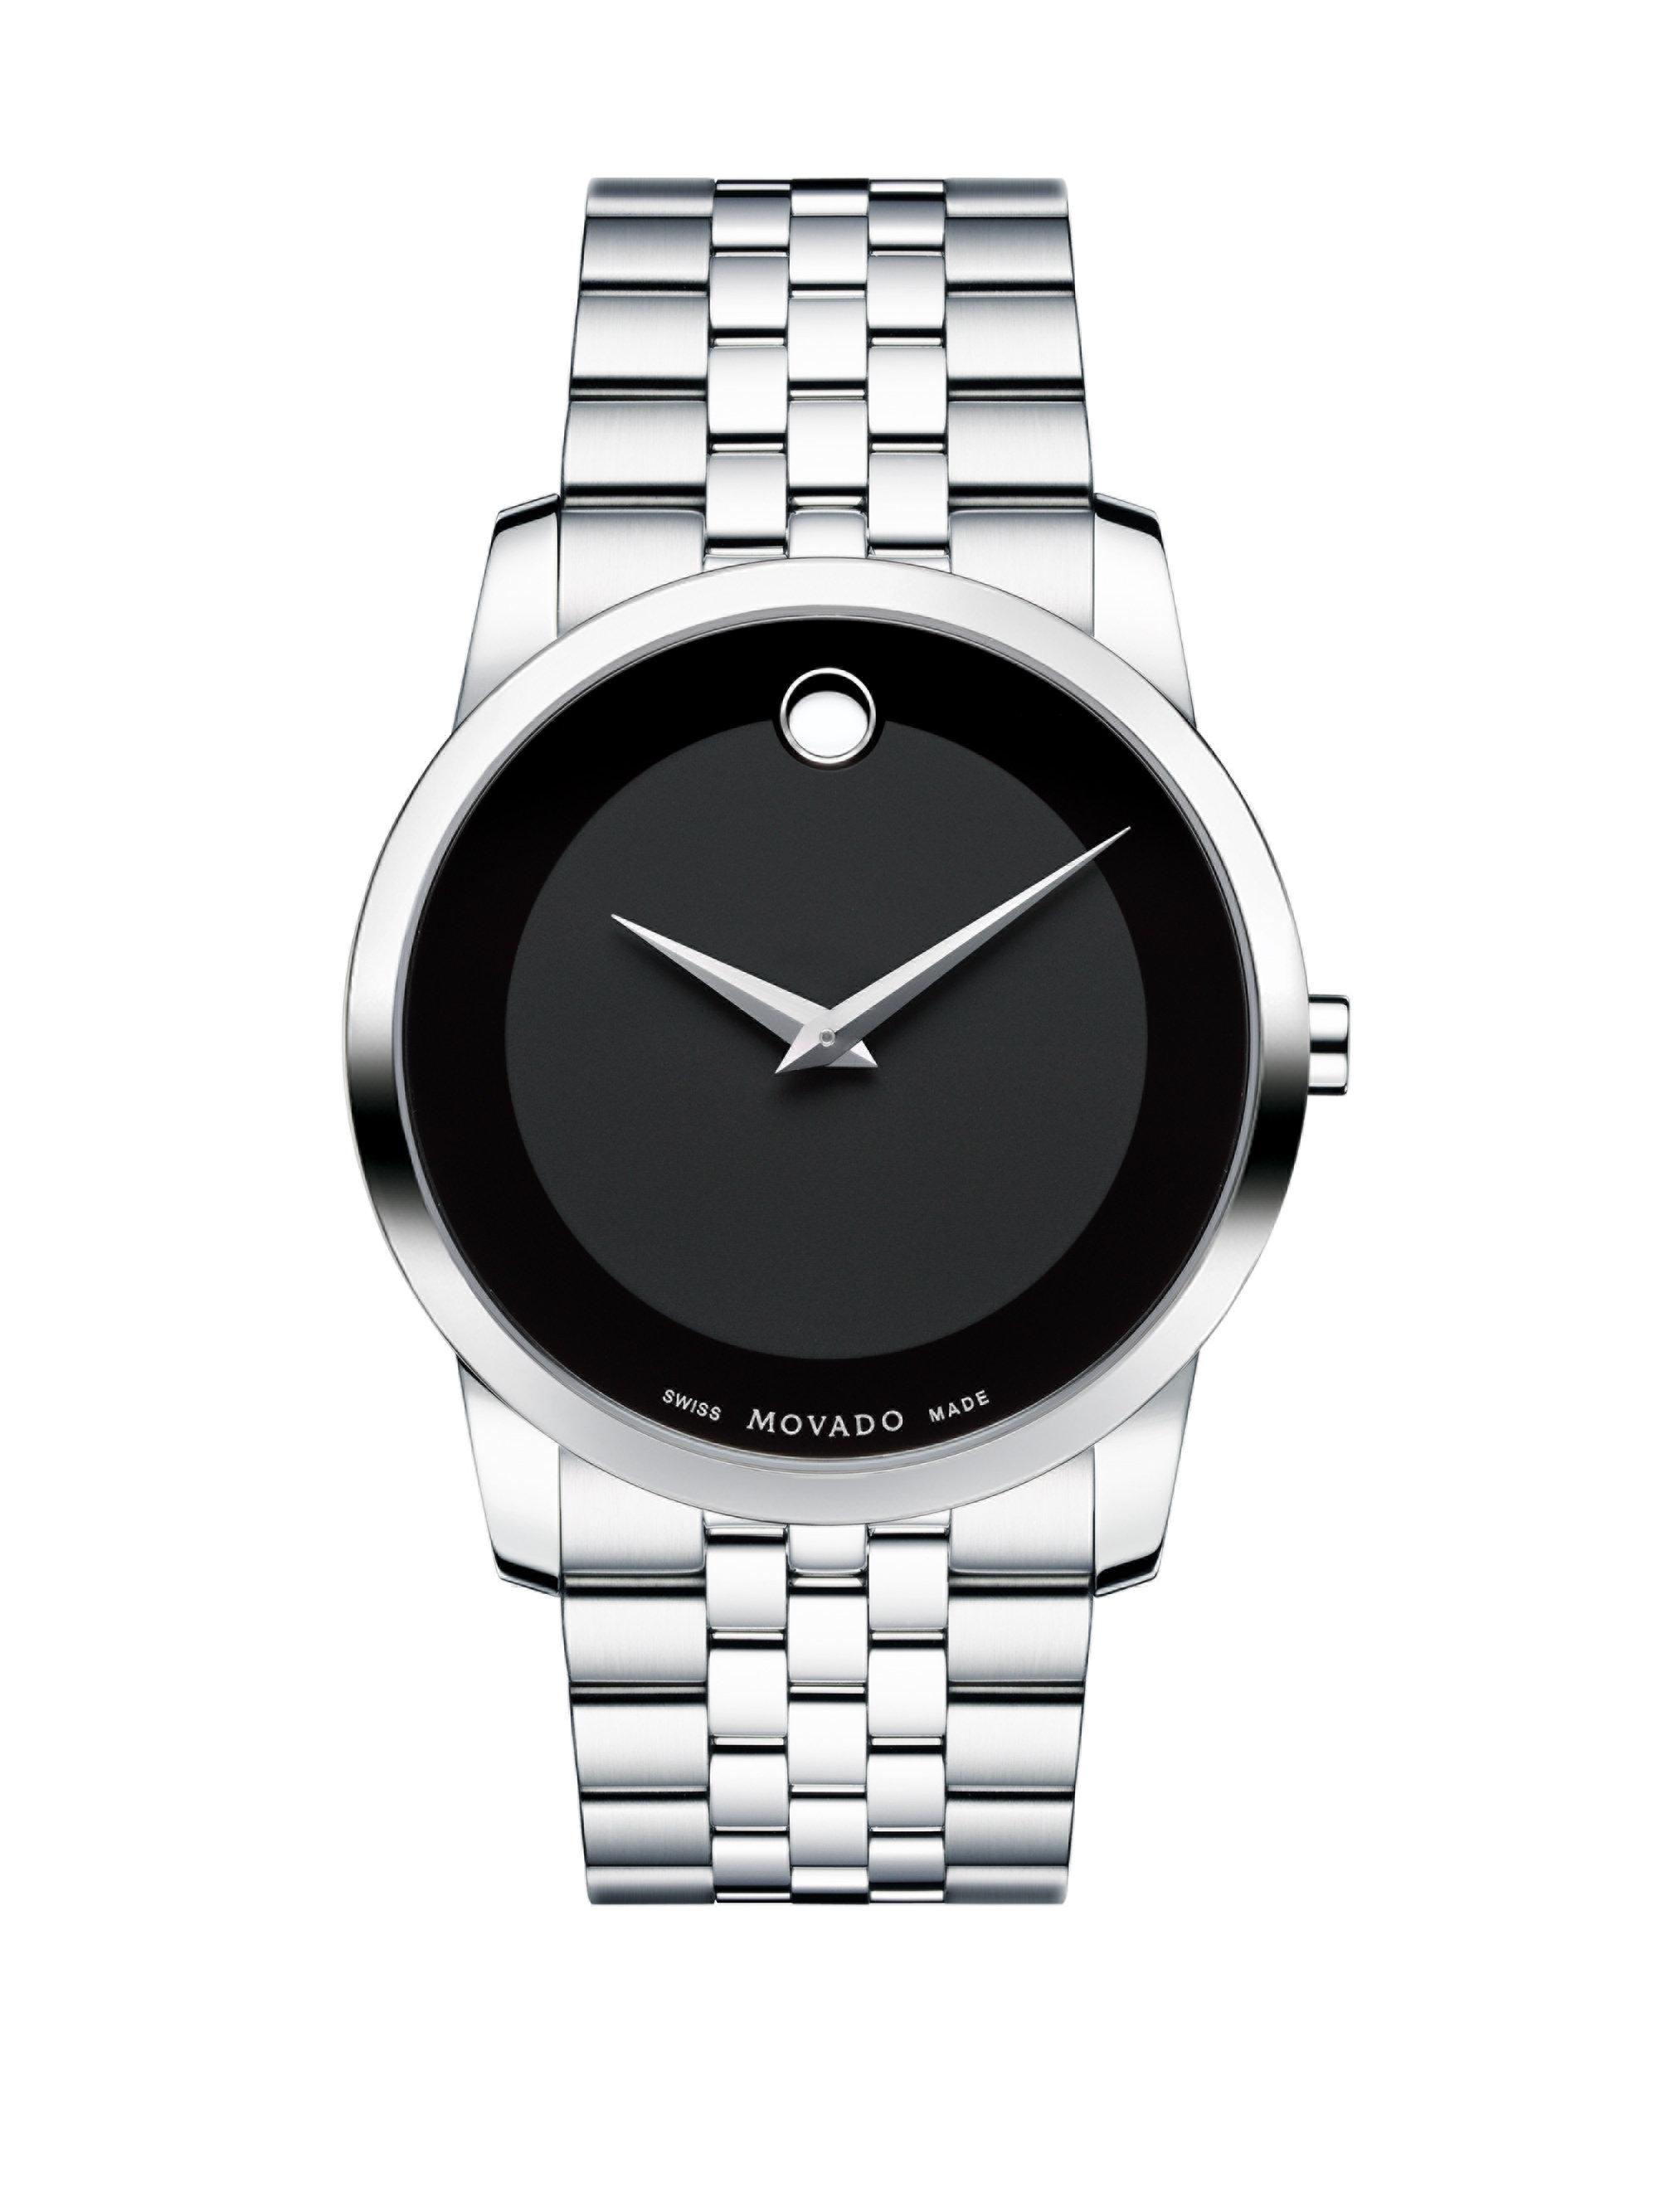 Lyst - Movado Museum Classic Stainless Steel Watch in Metallic for Men Movado Men's Museum Classic Stainless Steel Watch